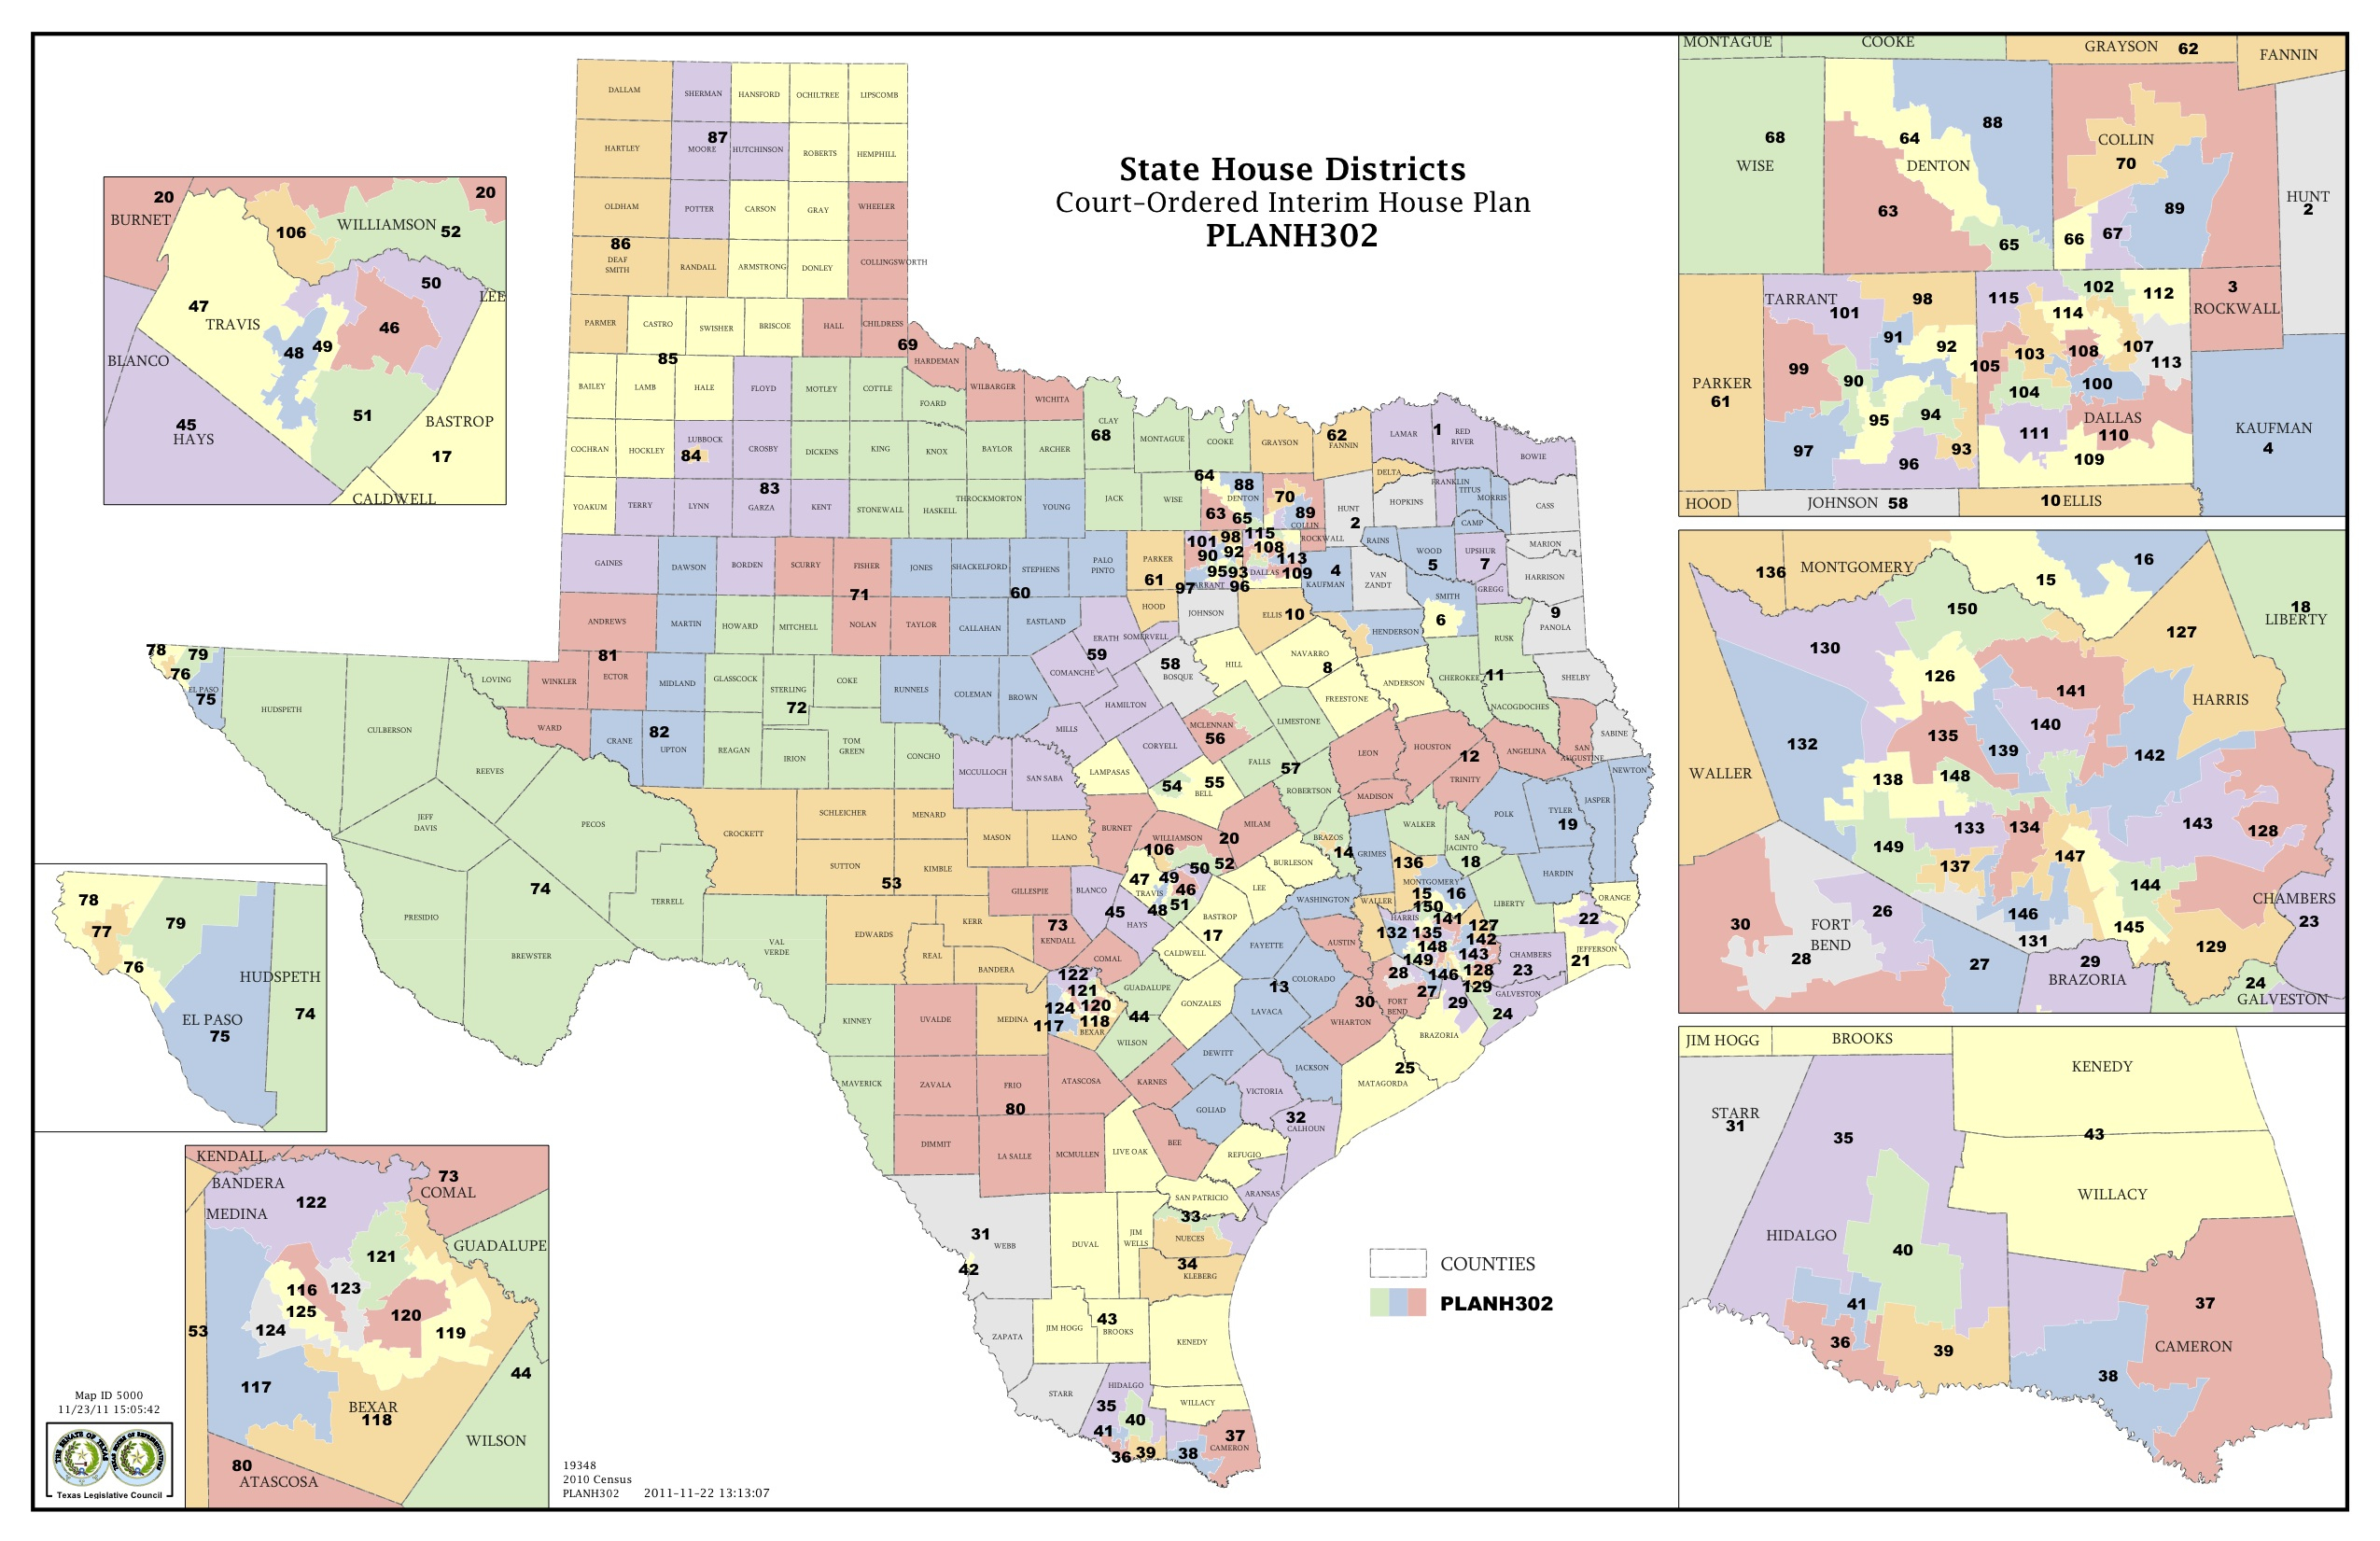 Court Increases Minority Districts In Texas Legislature | The Texas - Texas State Senate District 19 Map